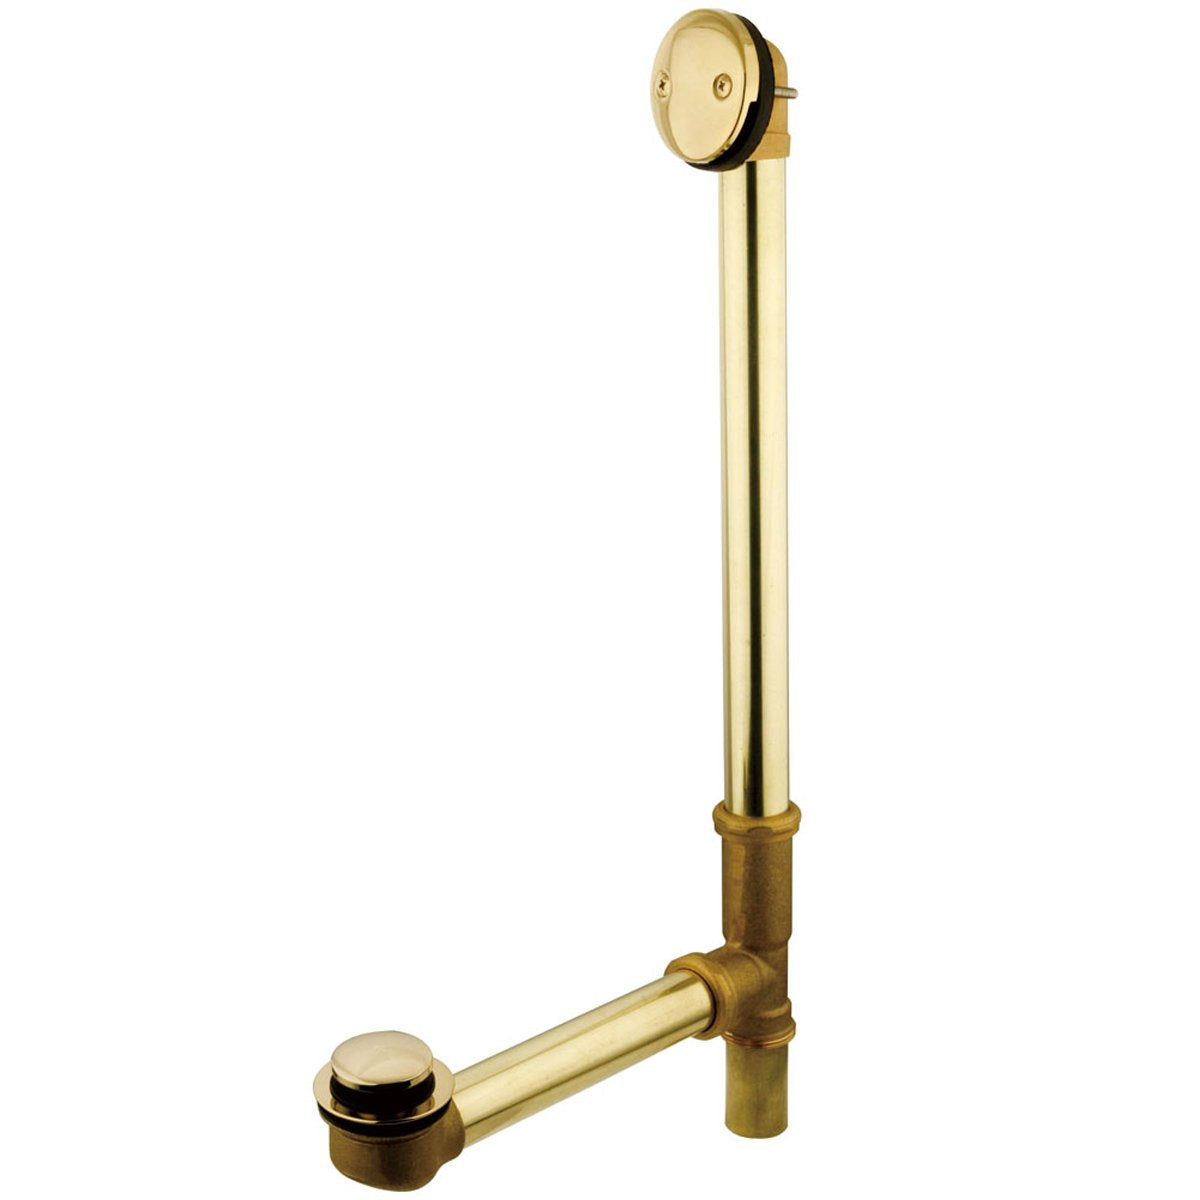 Kingston Brass Made to Match 18" Tip Toe Bathtub Waste and Overflow Drain-Bathroom Accessories-Free Shipping-Directsinks.